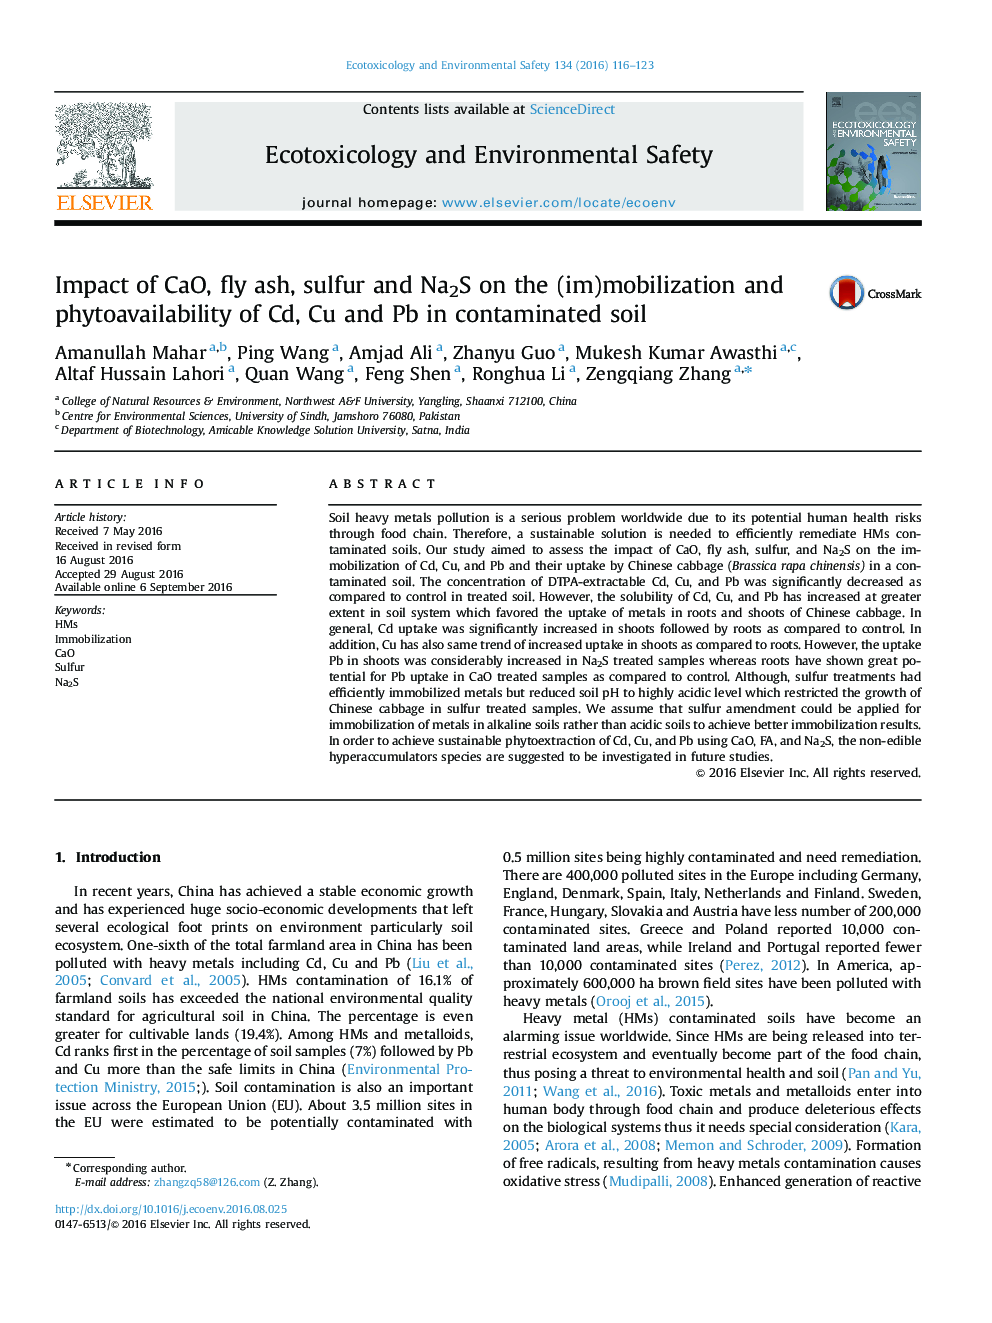 Impact of CaO, fly ash, sulfur and Na2S on the (im)mobilization and phytoavailability of Cd, Cu and Pb in contaminated soil